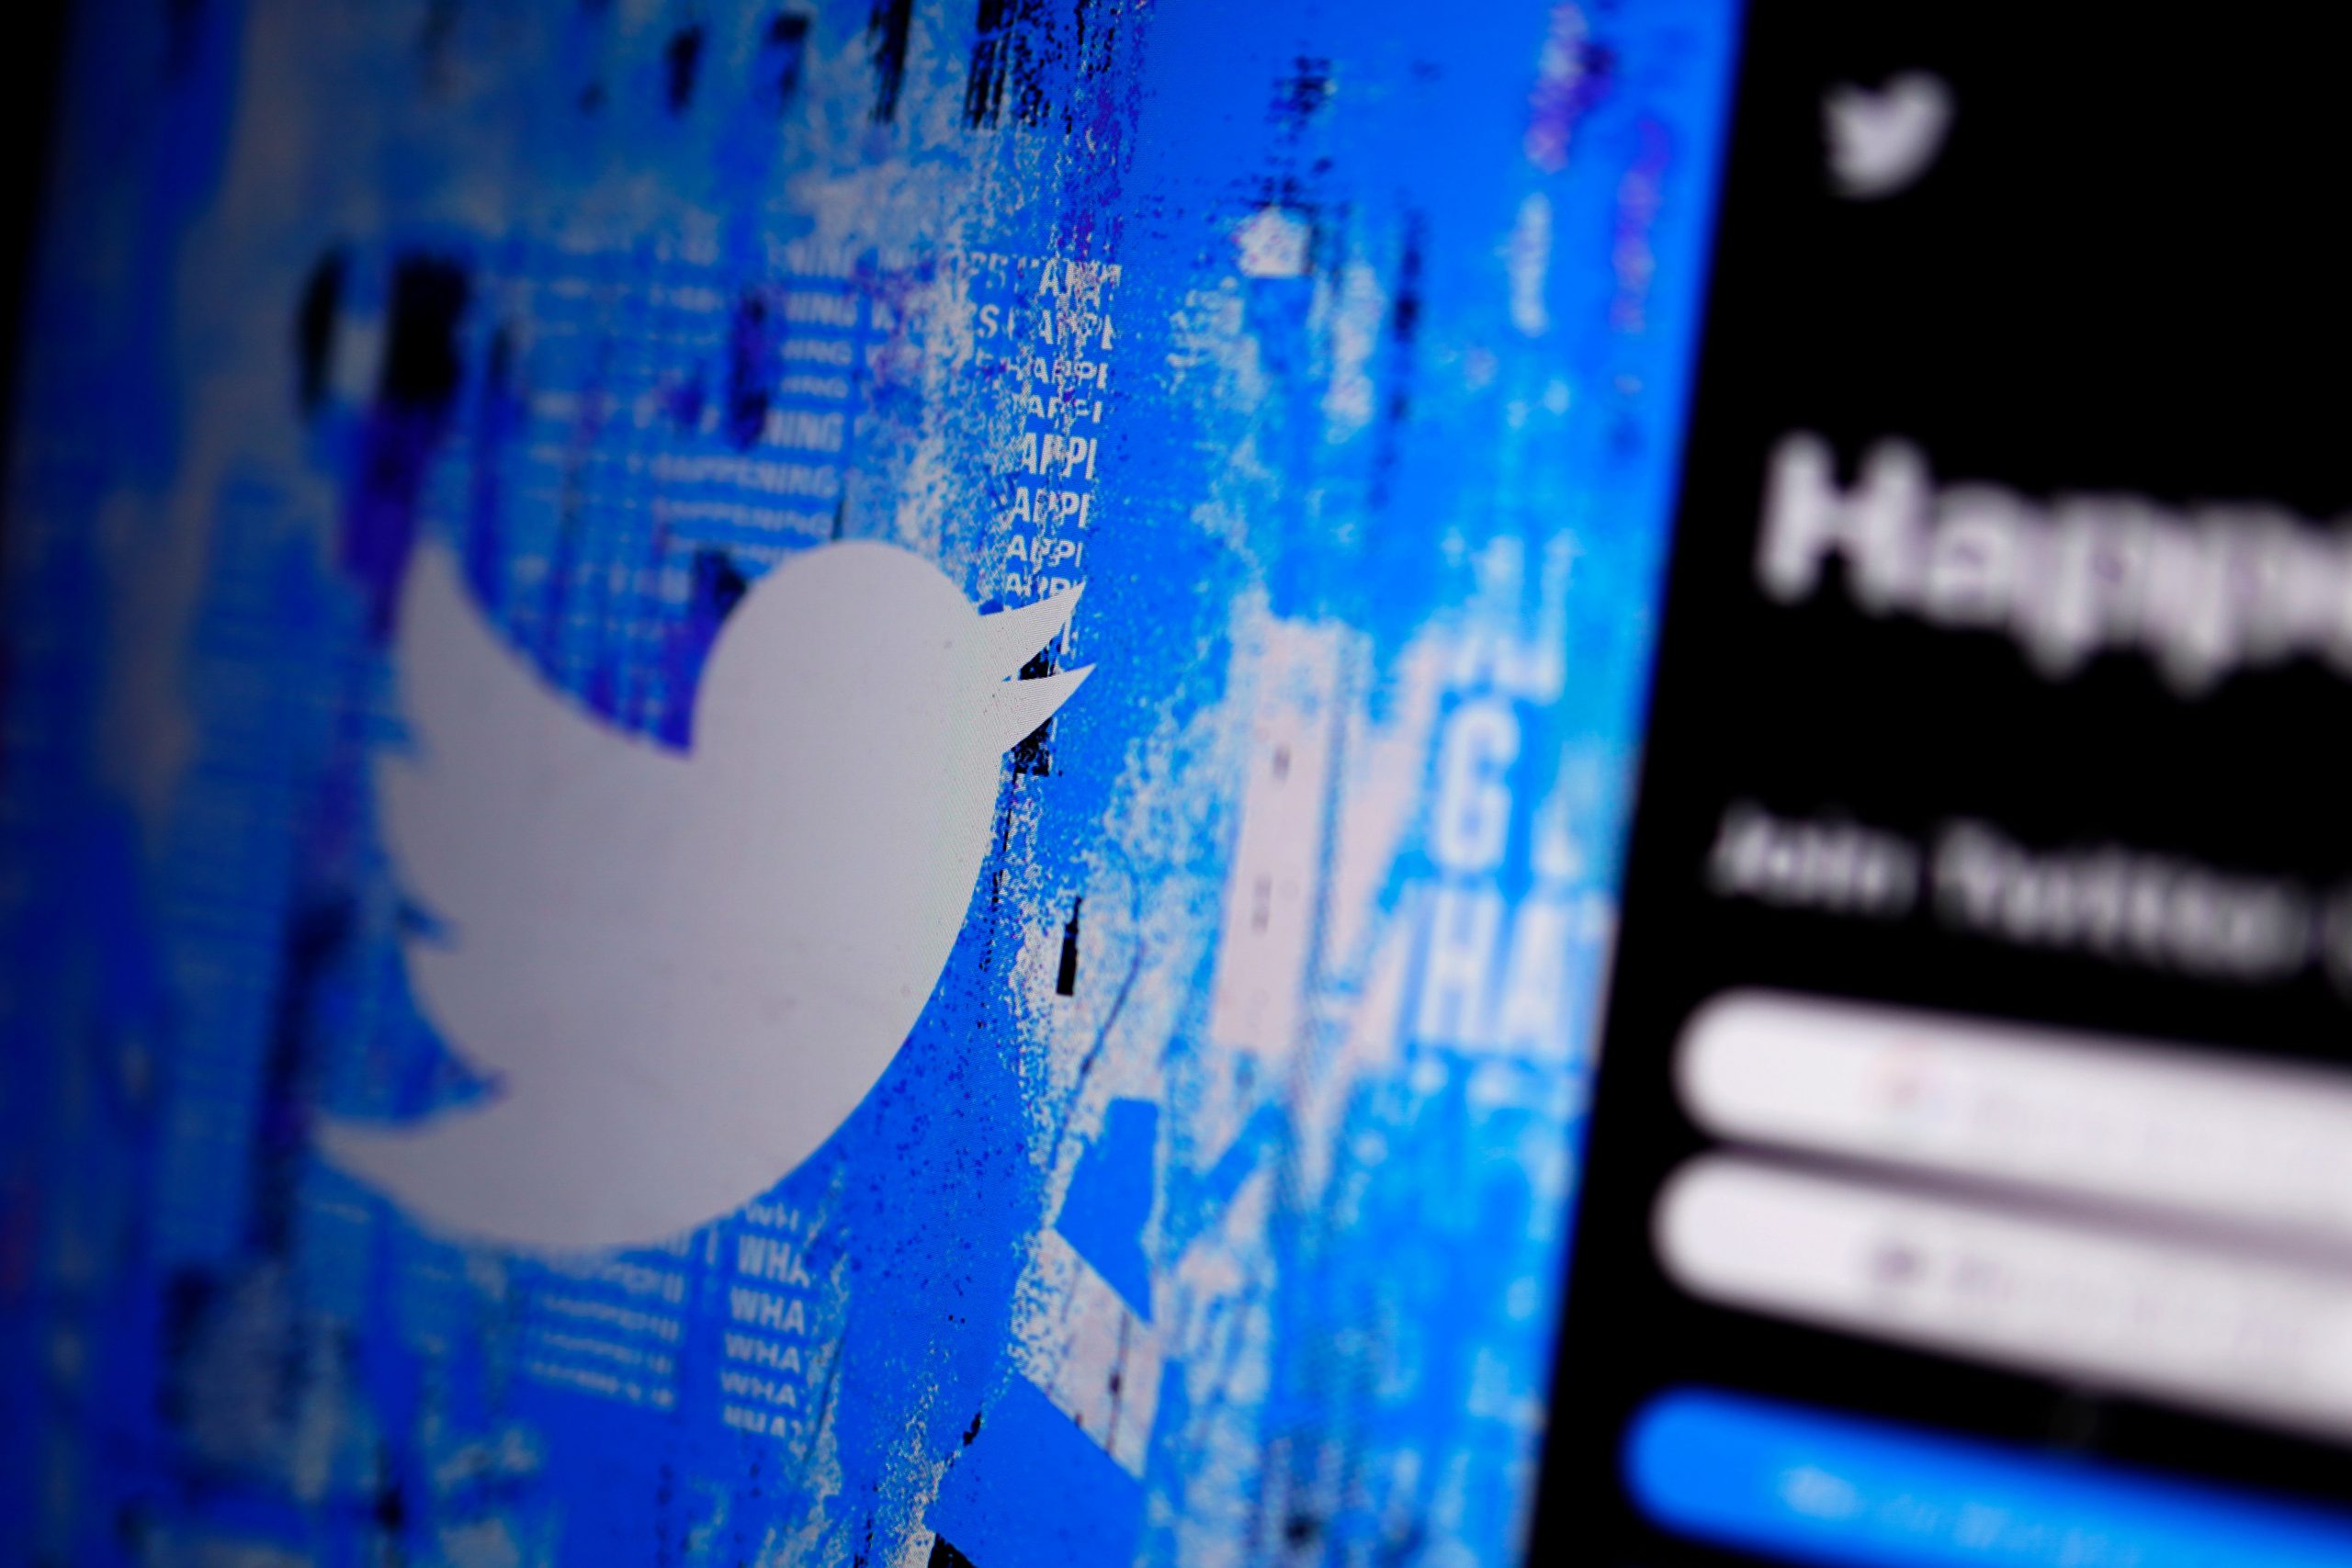 Ex-Twitter employee faces charges for spying on Saudi dissidents